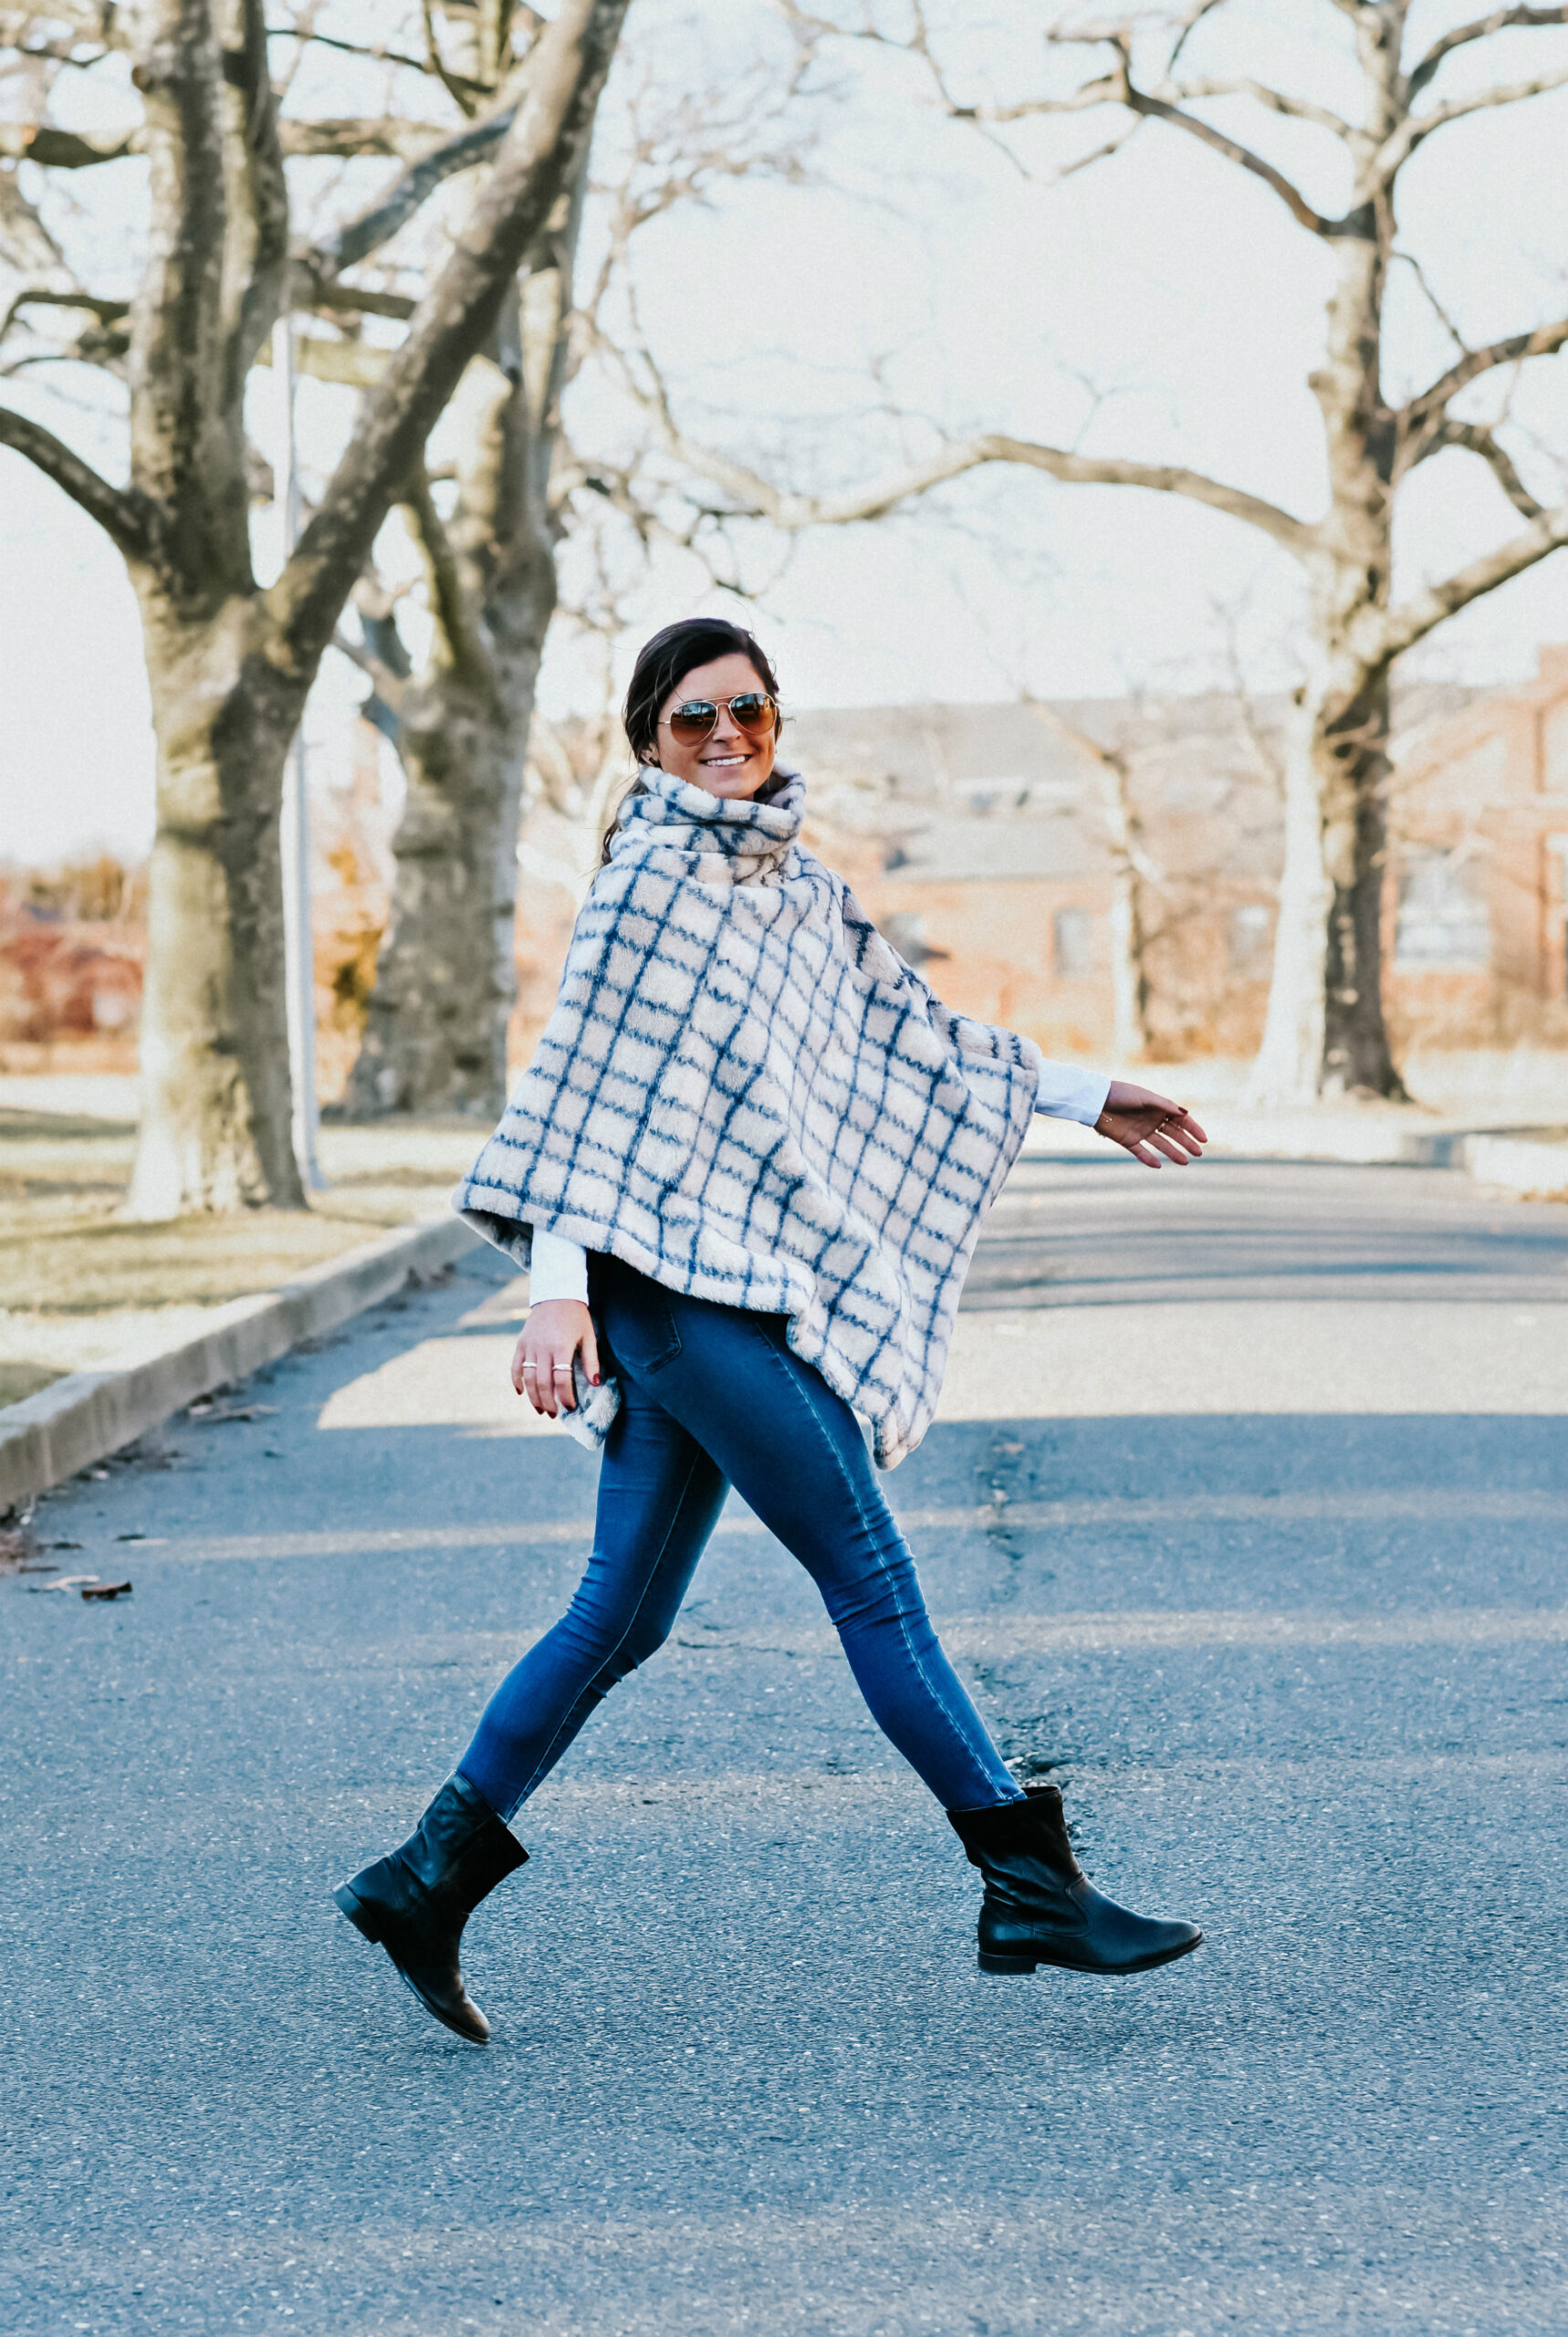 Johnston & Murphy Plaid Turtleneck Poncho Outfit, Topshop Jamie Skinny Jeans, Johnston & Murphy Lenora Boot, Winter Outfit Idea, Tilden of To Be Bright